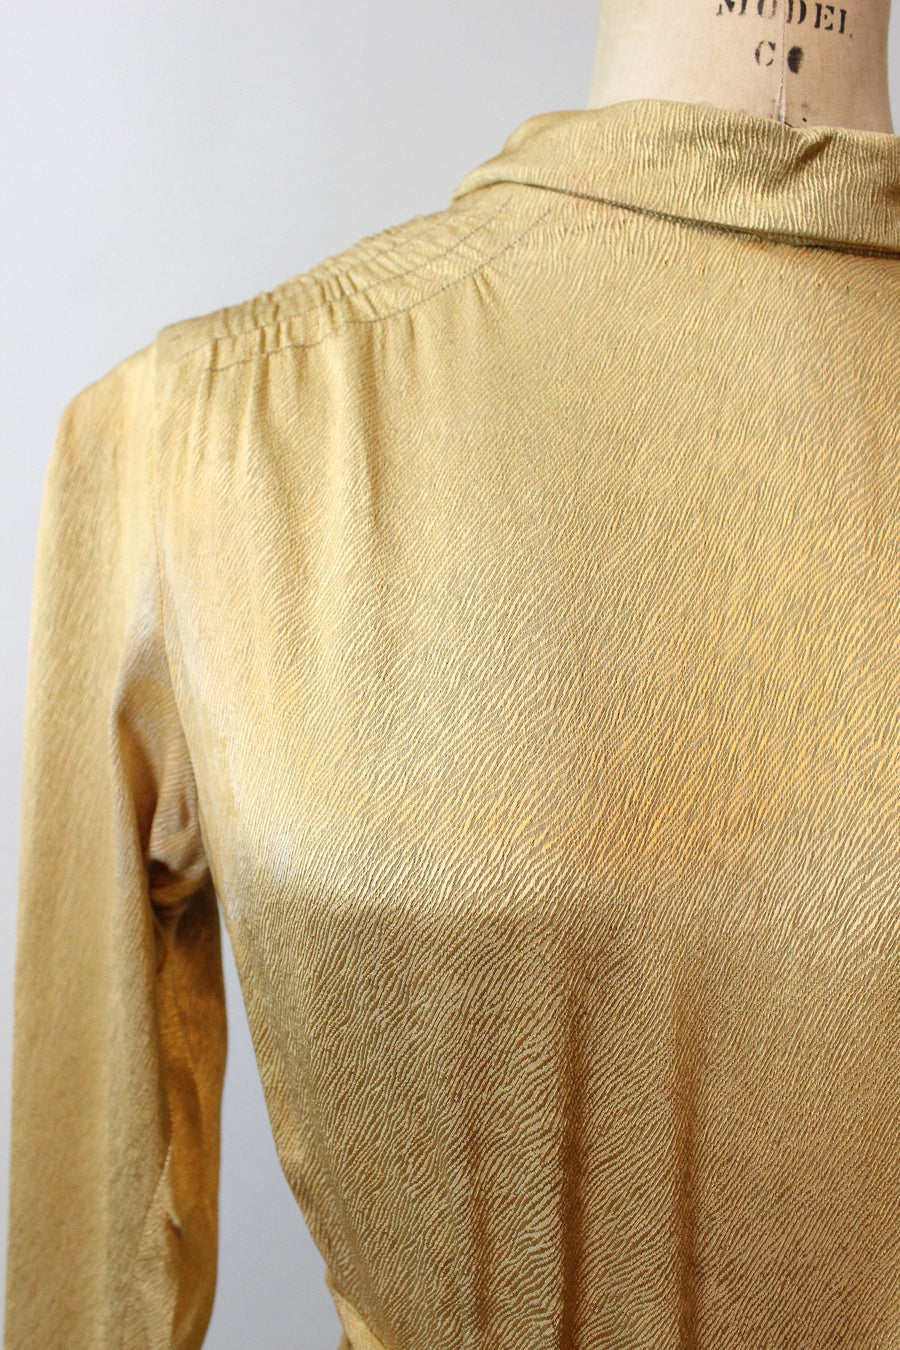 1930s GOLD GODDESS belted dress gown small | new fall